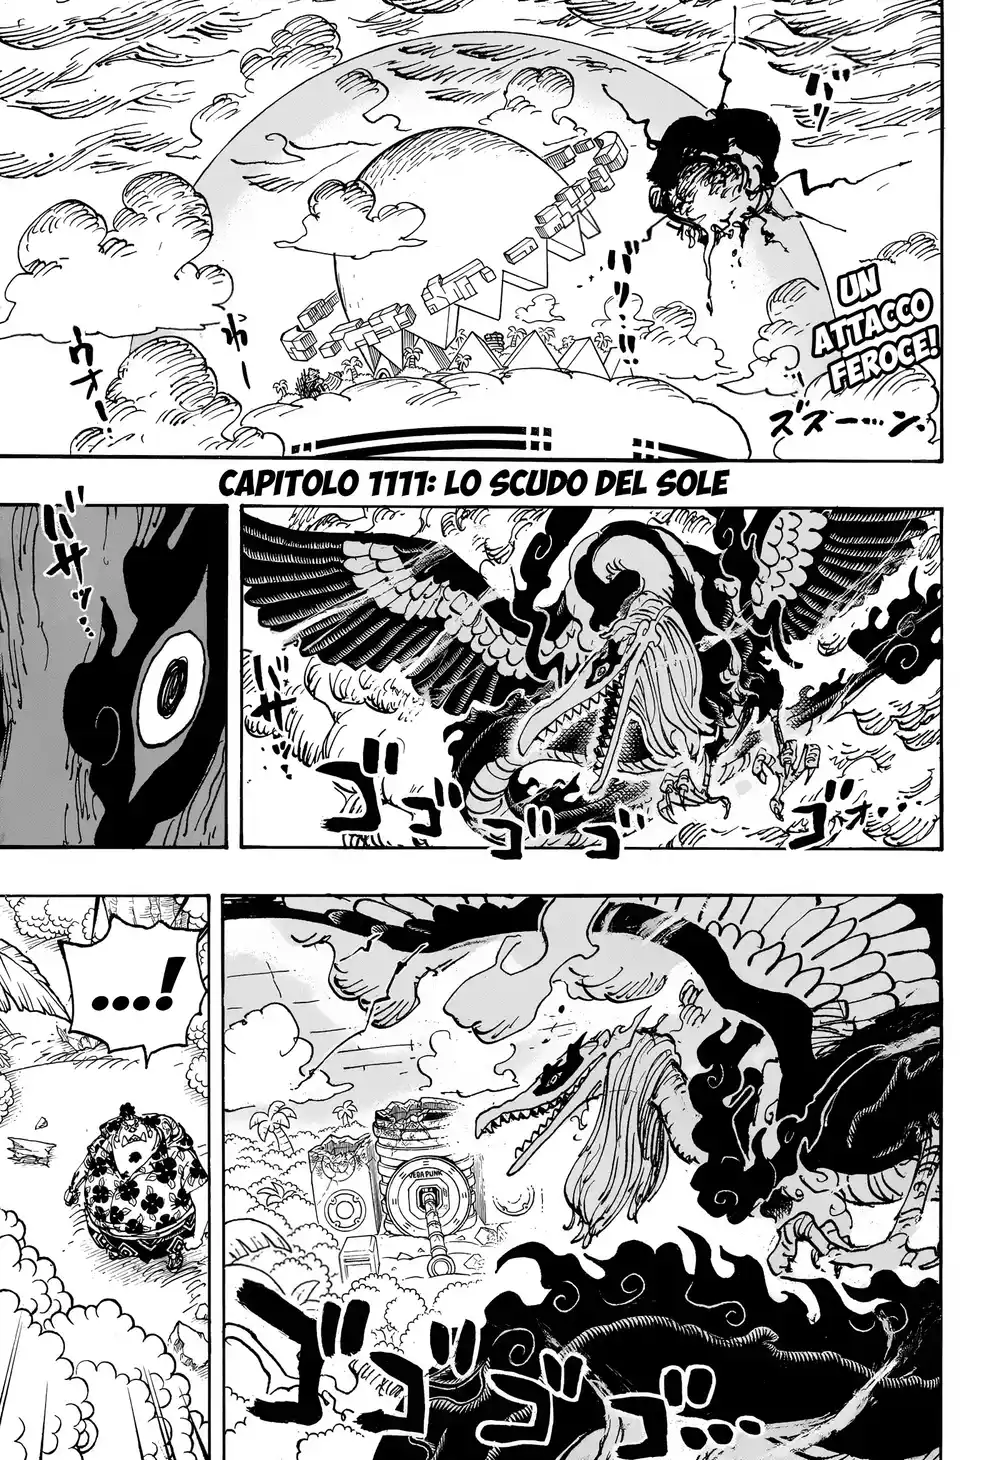 One Piece Capitolo 1111 page 2